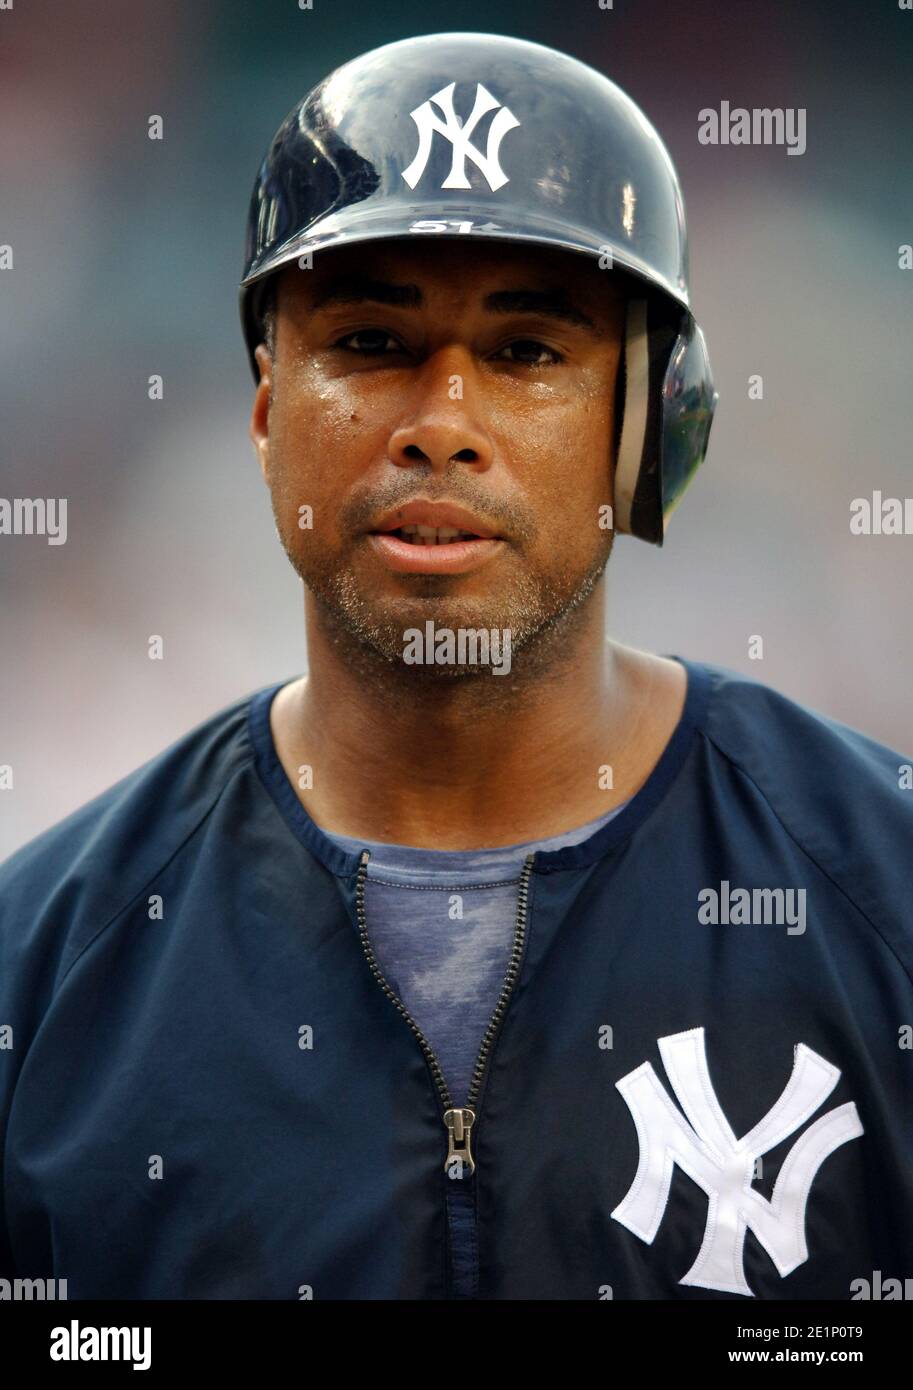 Bernie Williams of the New York Yankees during batting practice before game against the Los Angeles Angels of Anaheim at Angel Stadium in Anaheim, Cal Stock Photo